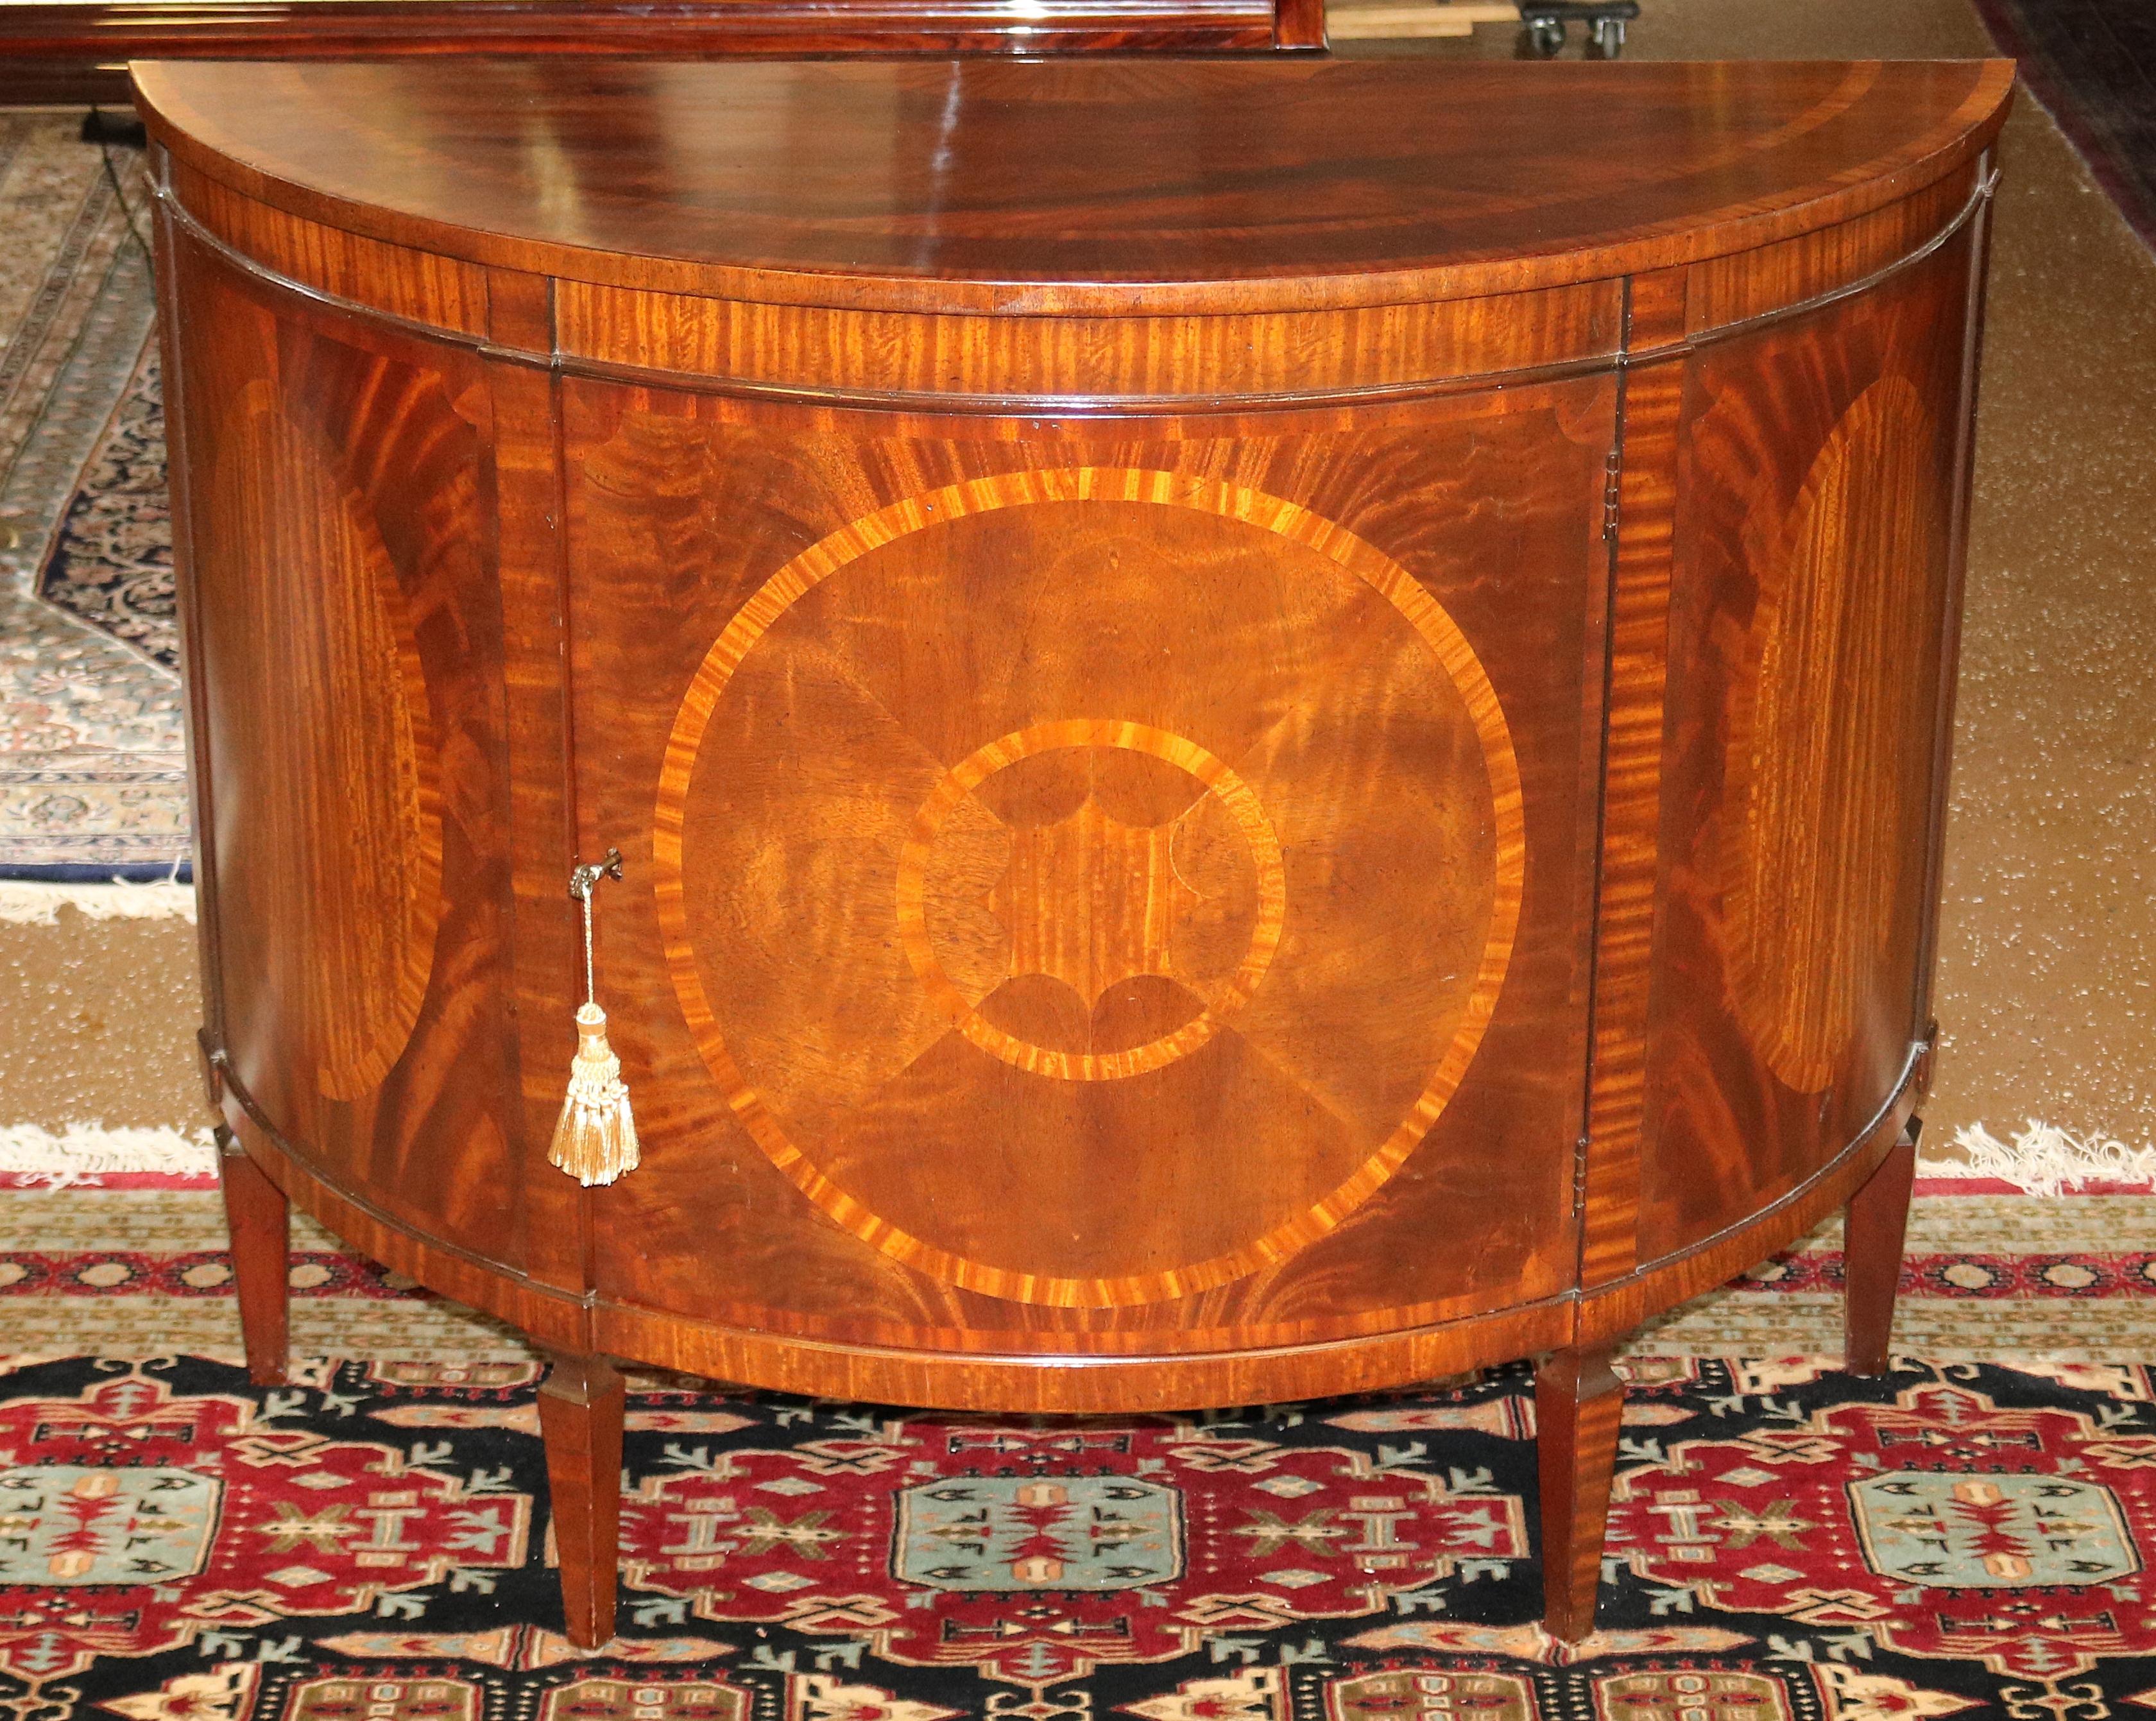 Flame Mahogany Historic Charleston Collection Demilune Chest Server Buffet

Dimensions : 48ʺW × 20ʺD × 38ʺH

Beautiful server made by Baker furniture for their historic Charleston collection. The mahogany grain and inlay are killer! The server is in